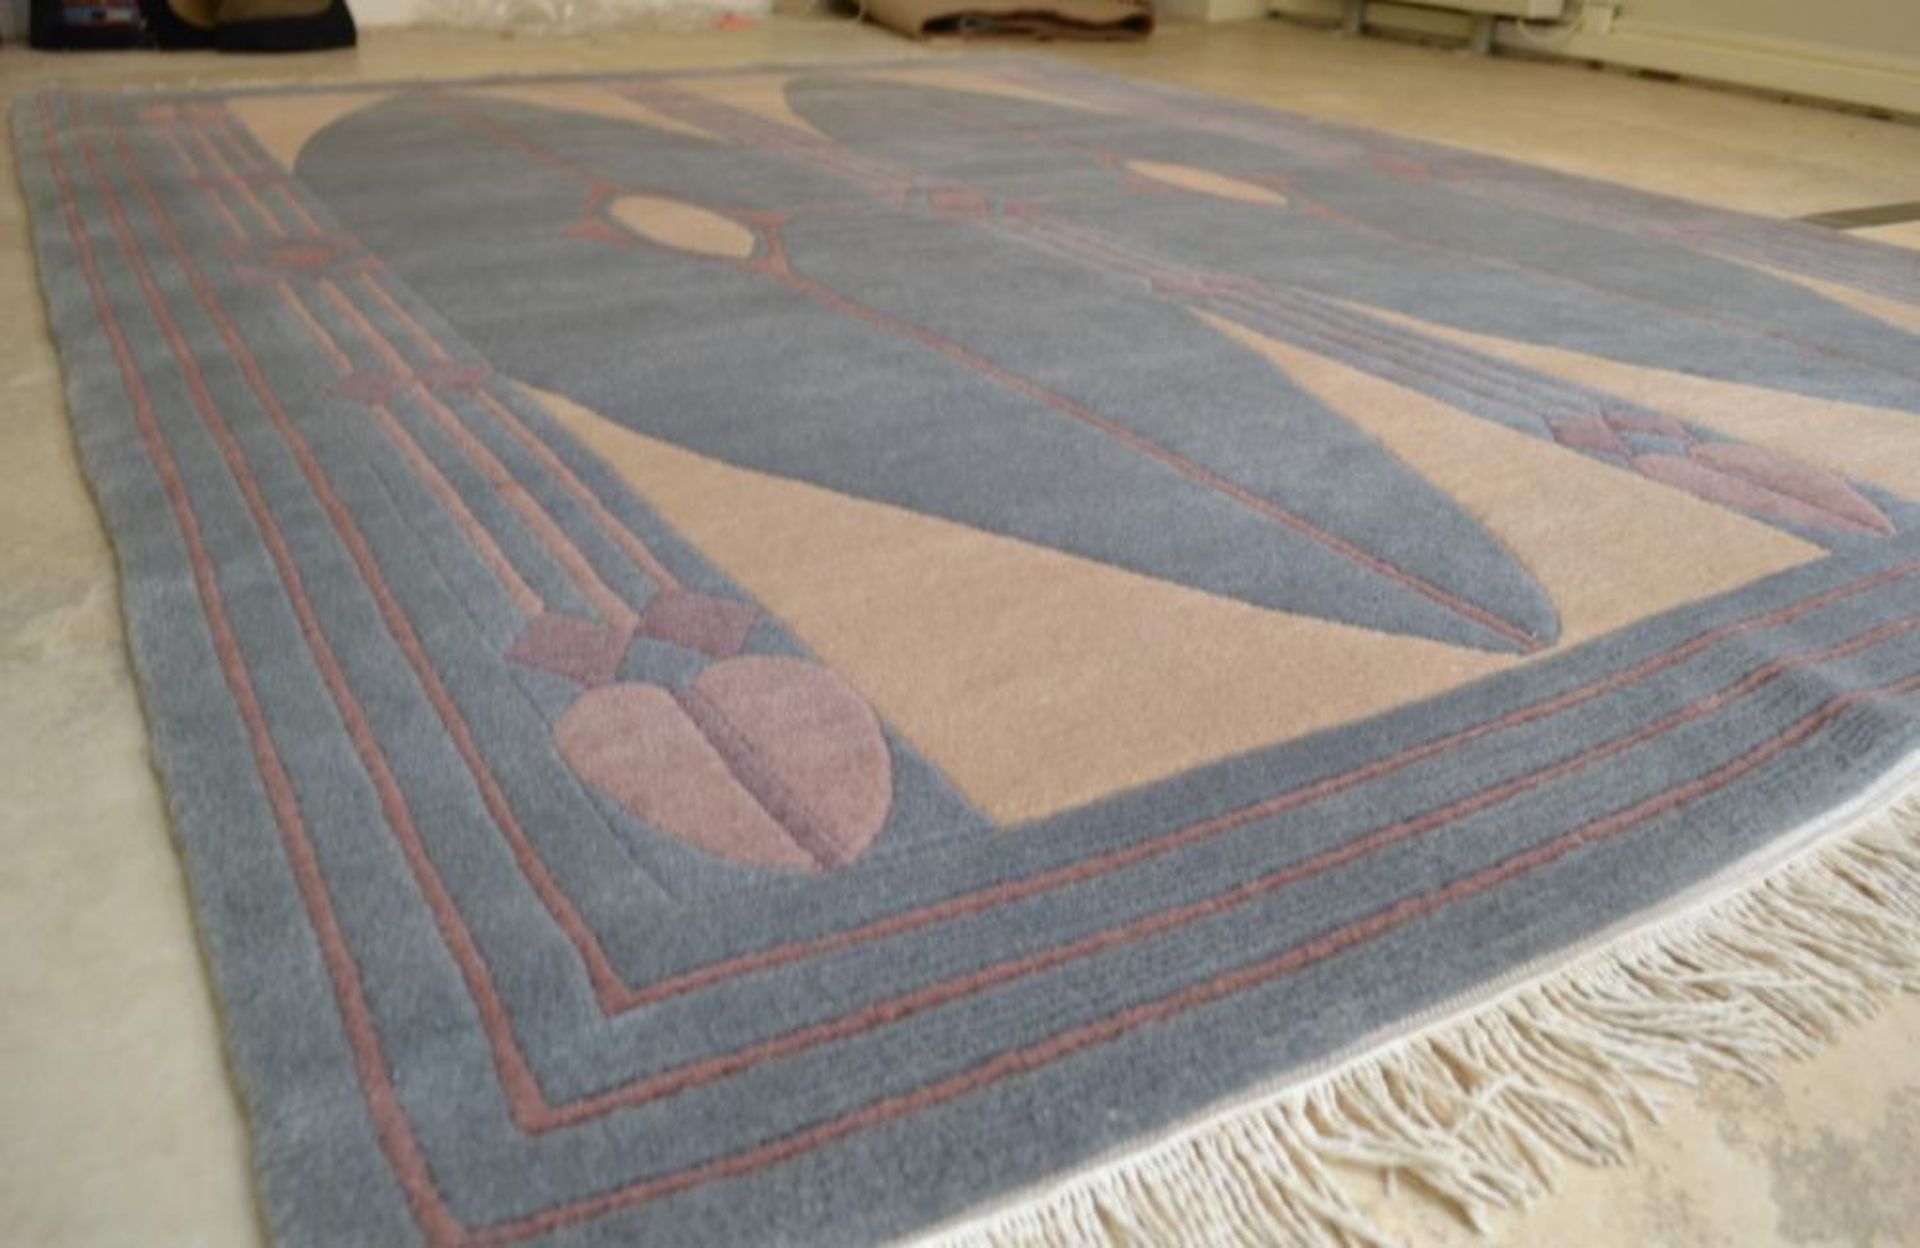 1 x Hand Knotted Mackintosh Design Nepalese Carpet - 100% Wool - Dimensions: 174x247cm - Unused - NO - Image 6 of 12